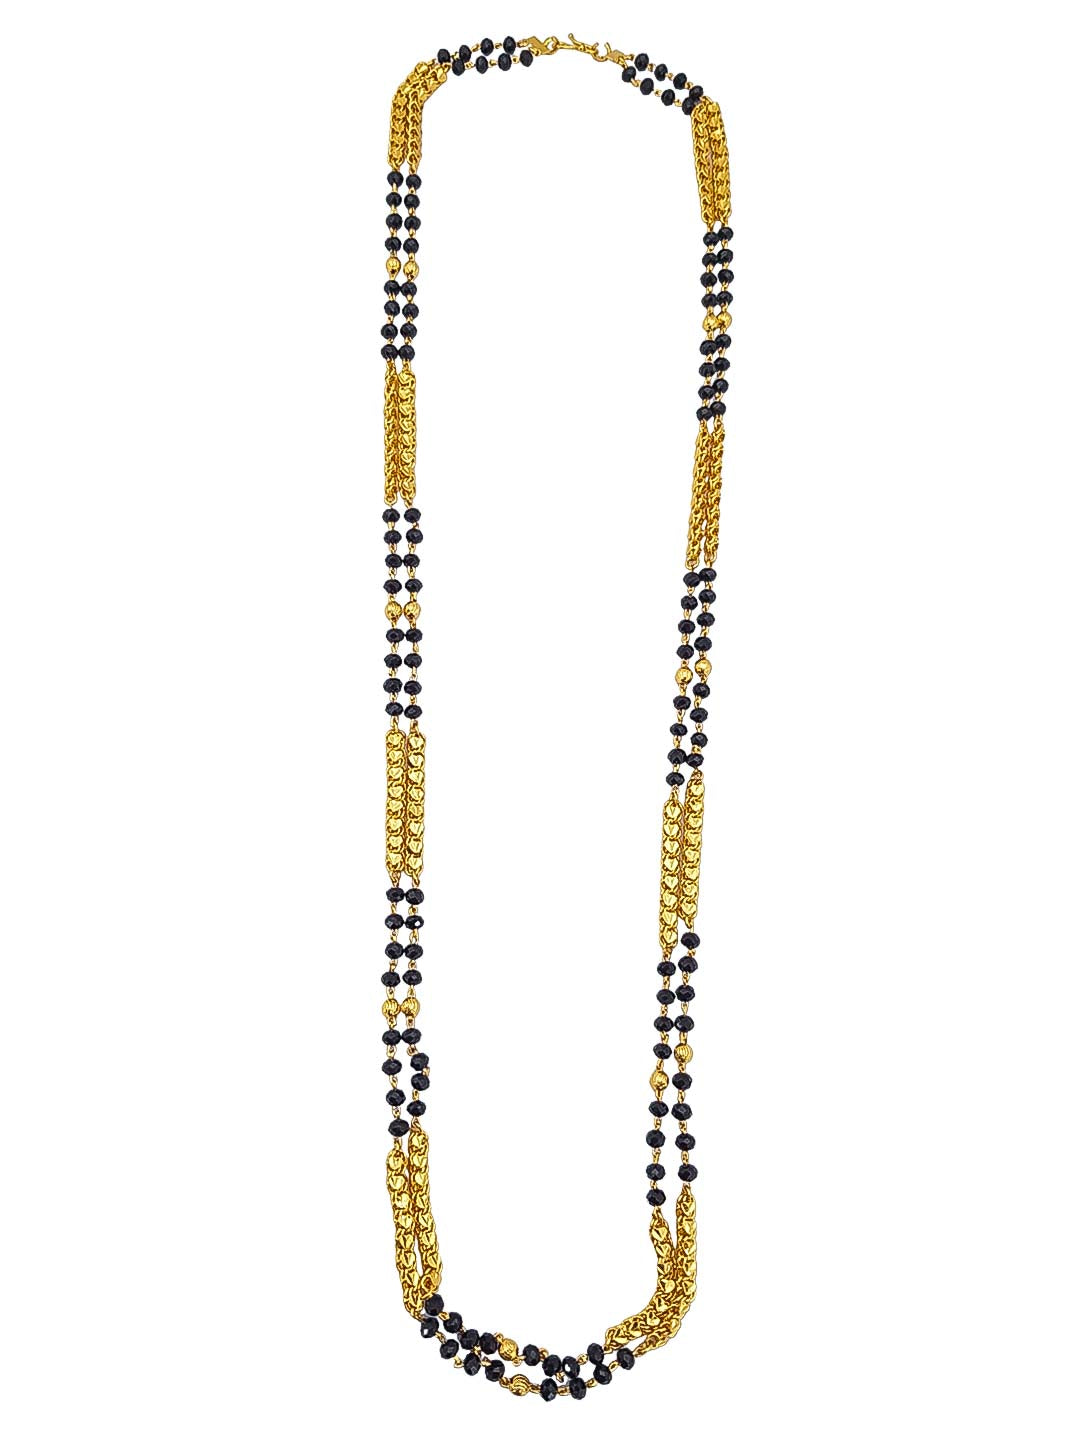 1 gm Microgold plating Black beads chain 30 inches 17358N